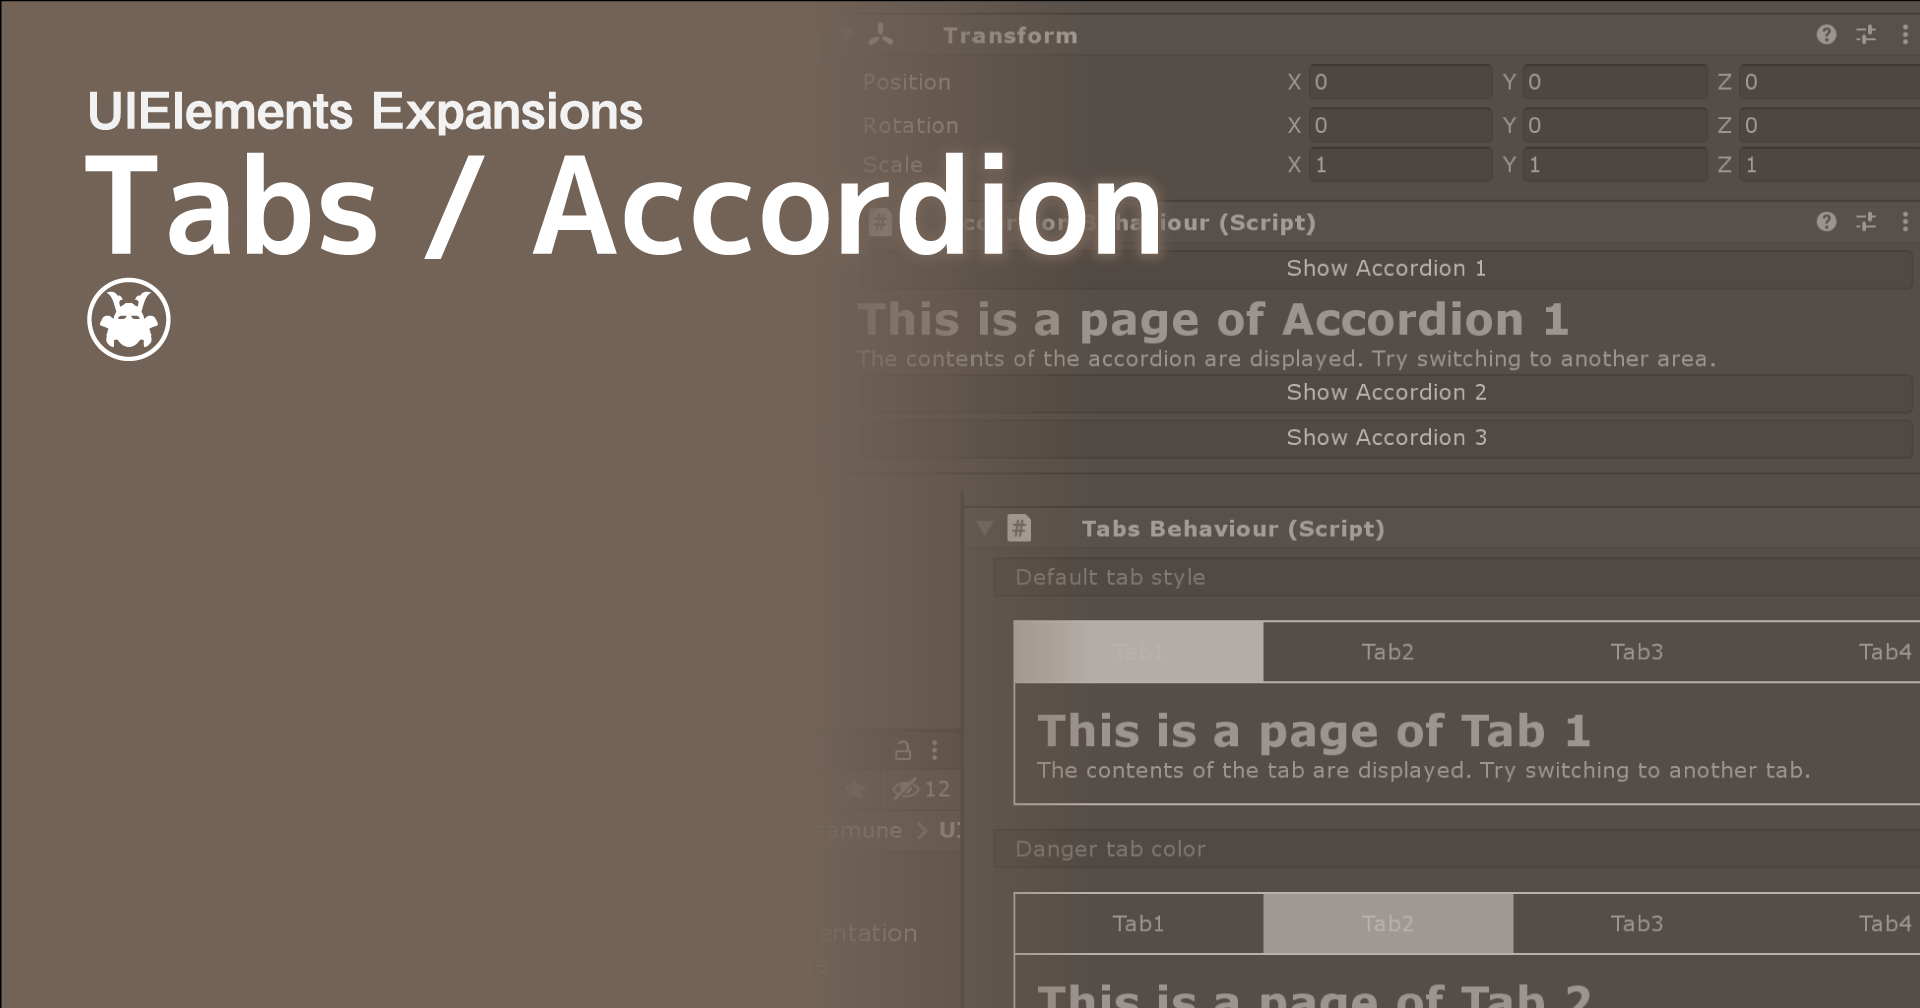 【Unity】UIElements Expansions: Tabs / Accordion